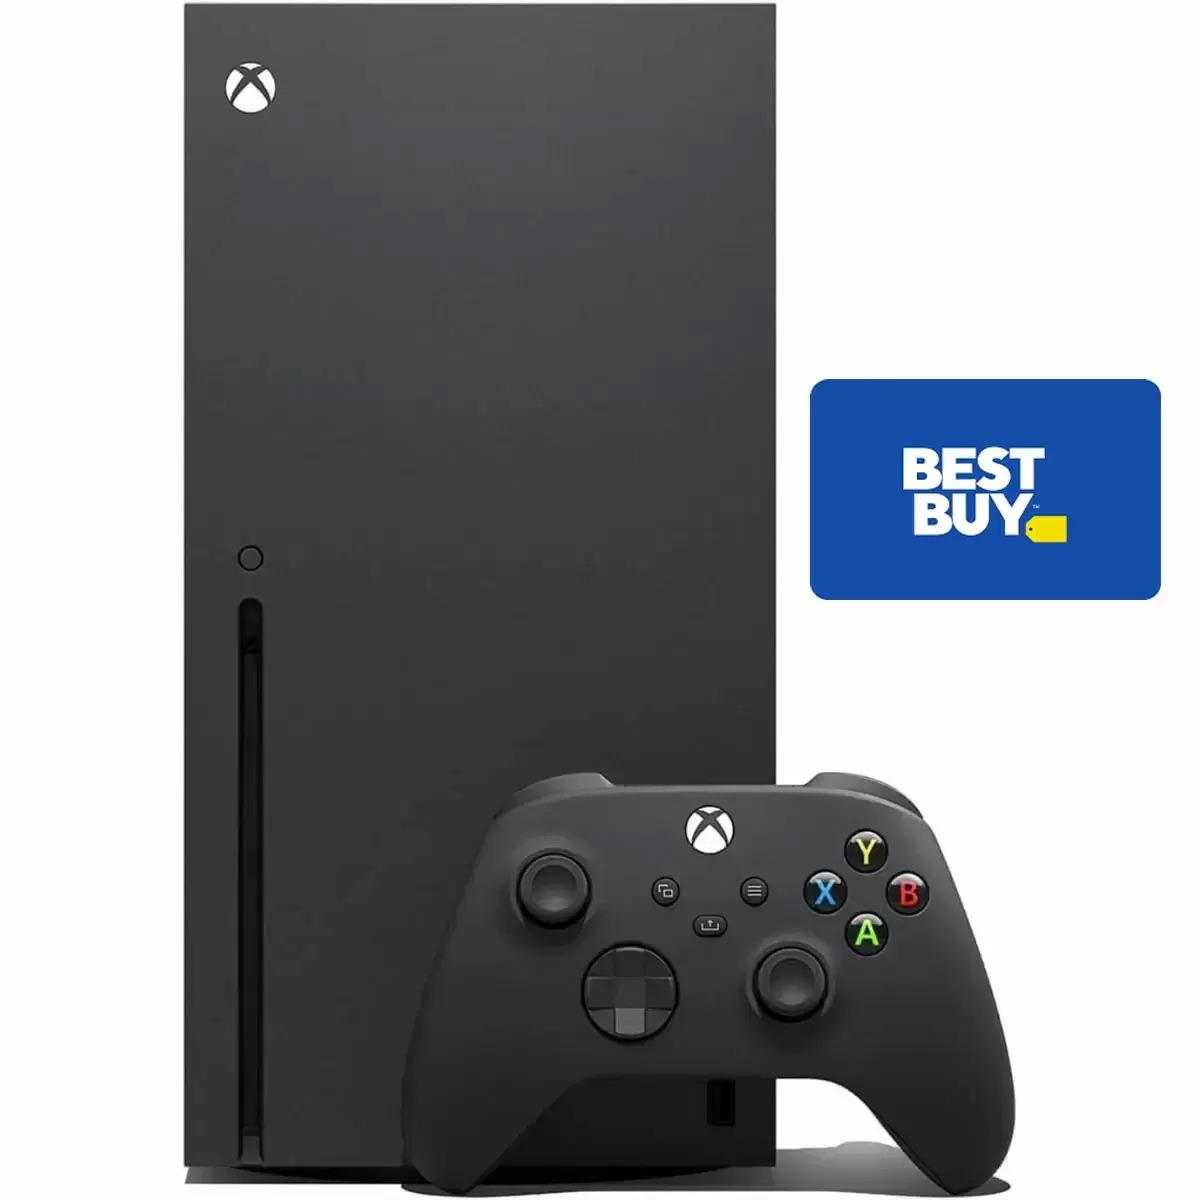 1TB Microsoft Xbox Series X Console + $50 Gift Card for $399.99